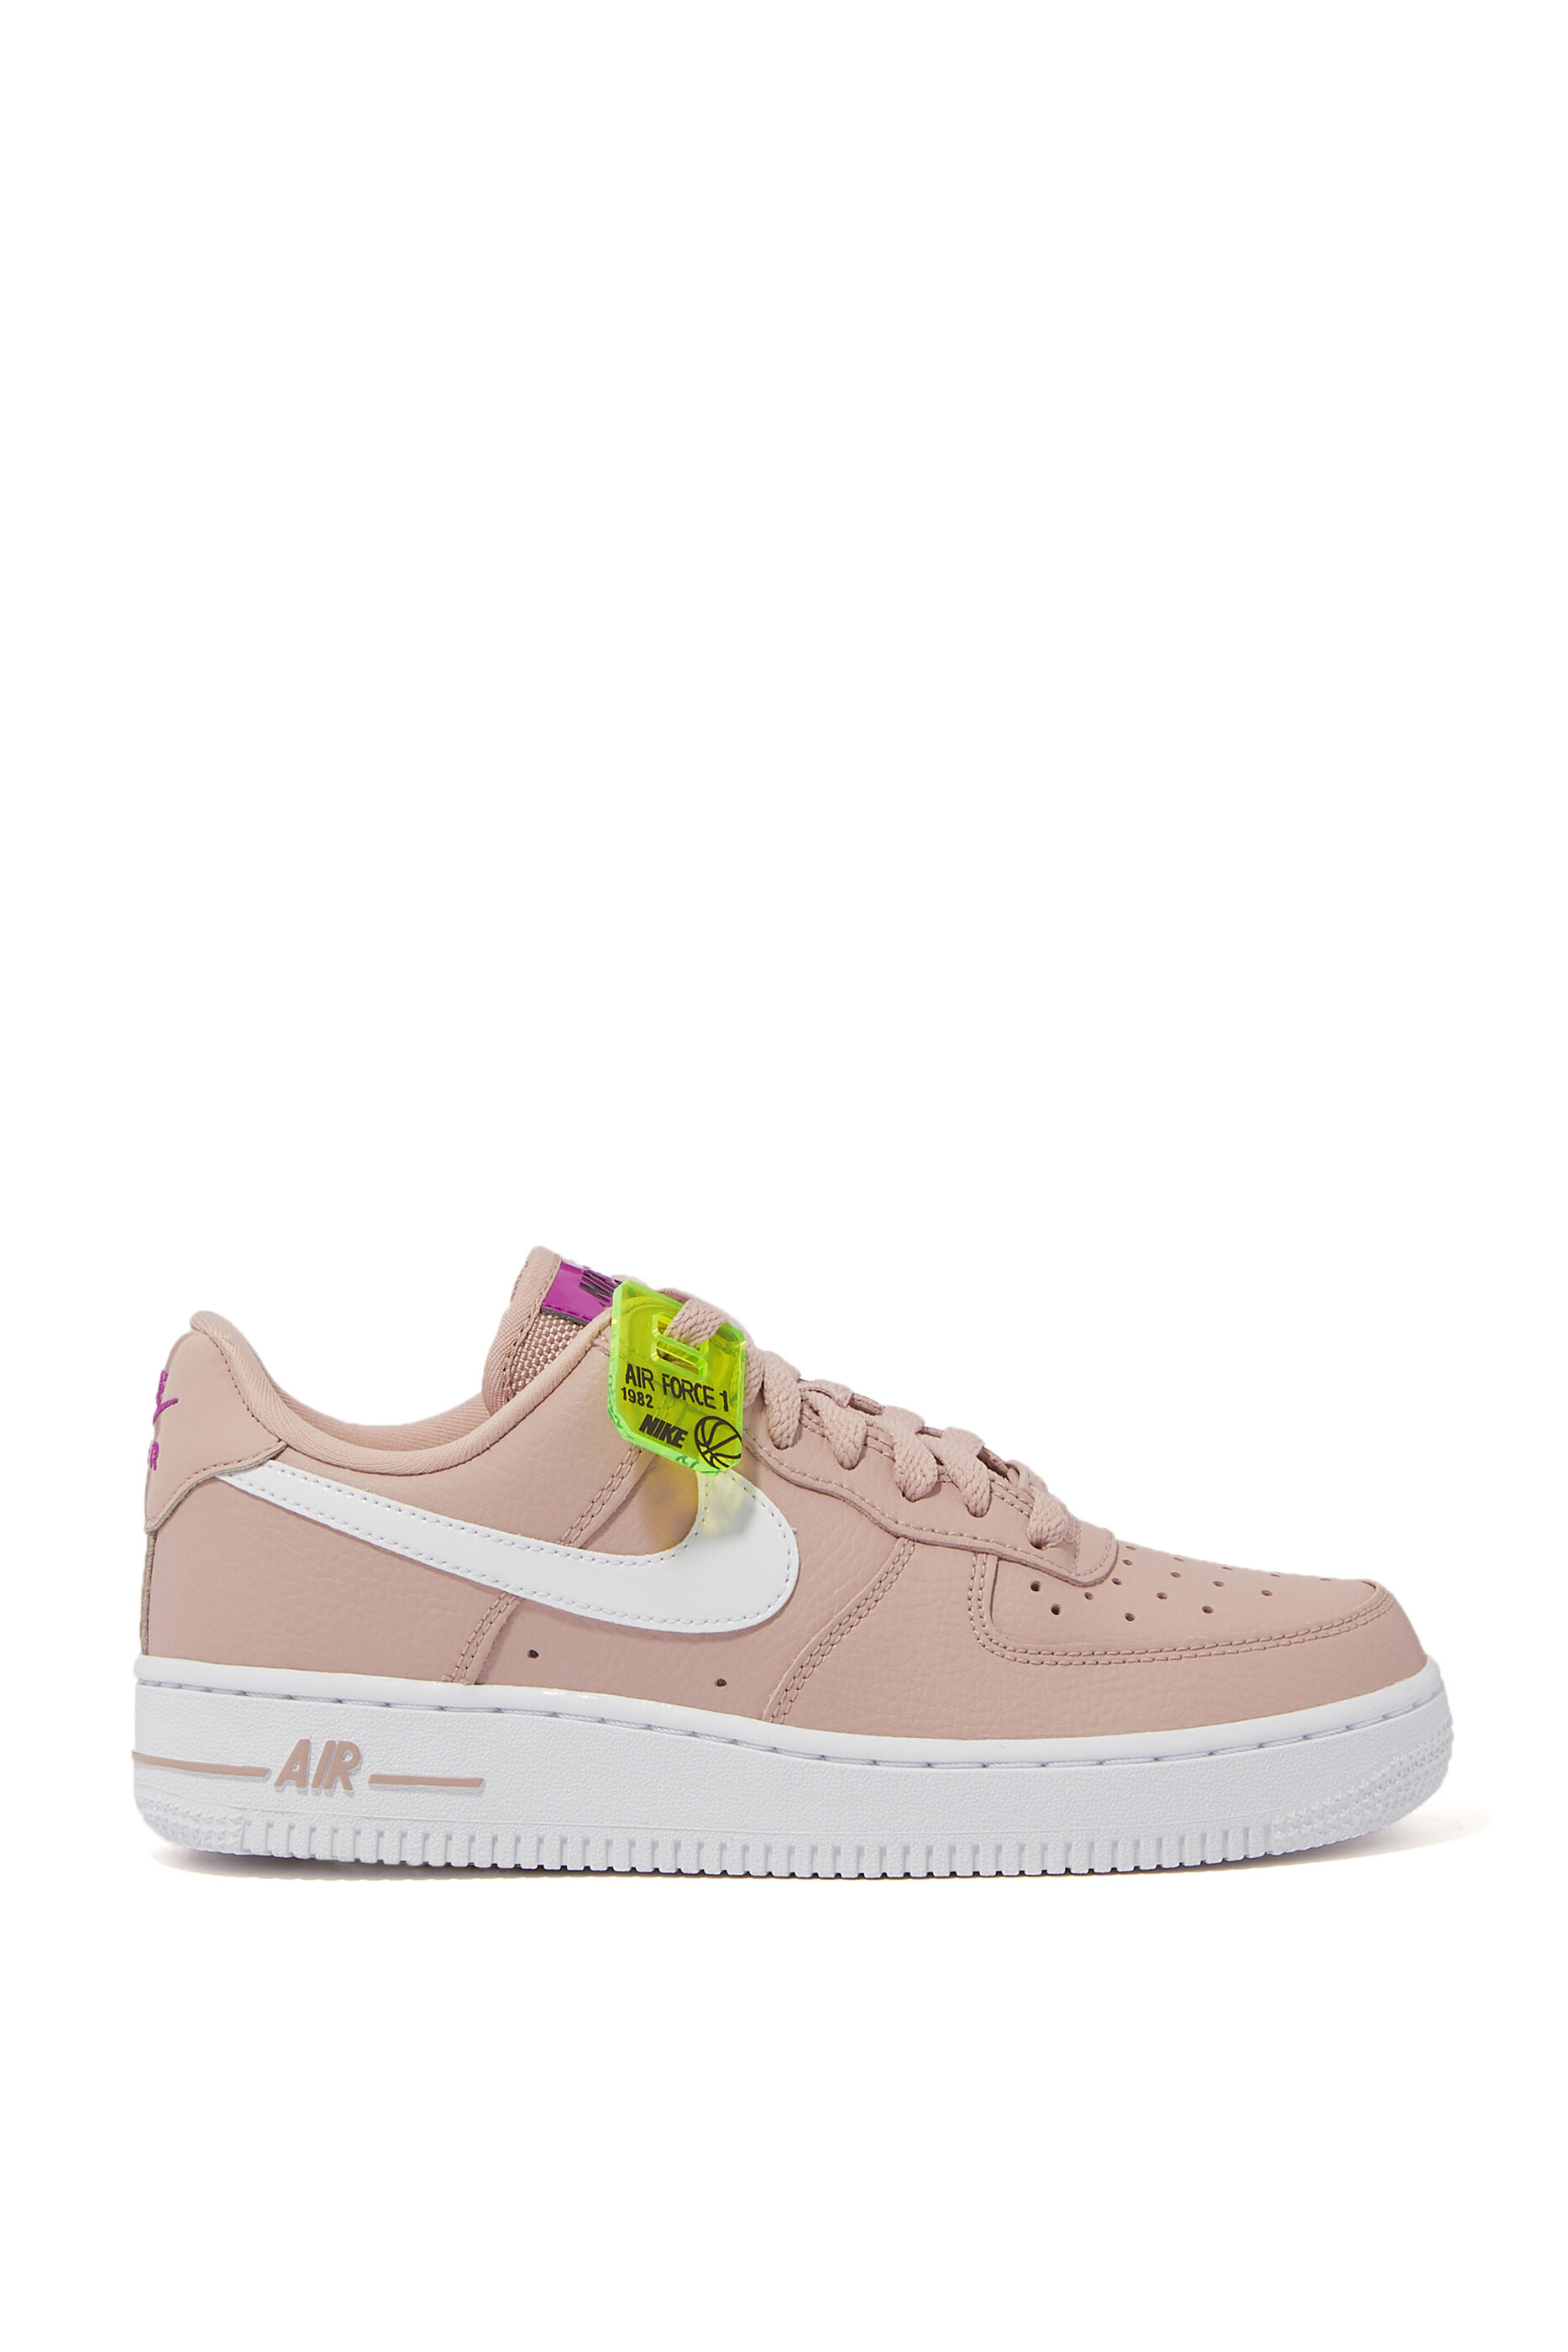 stores that carry nike air force 1